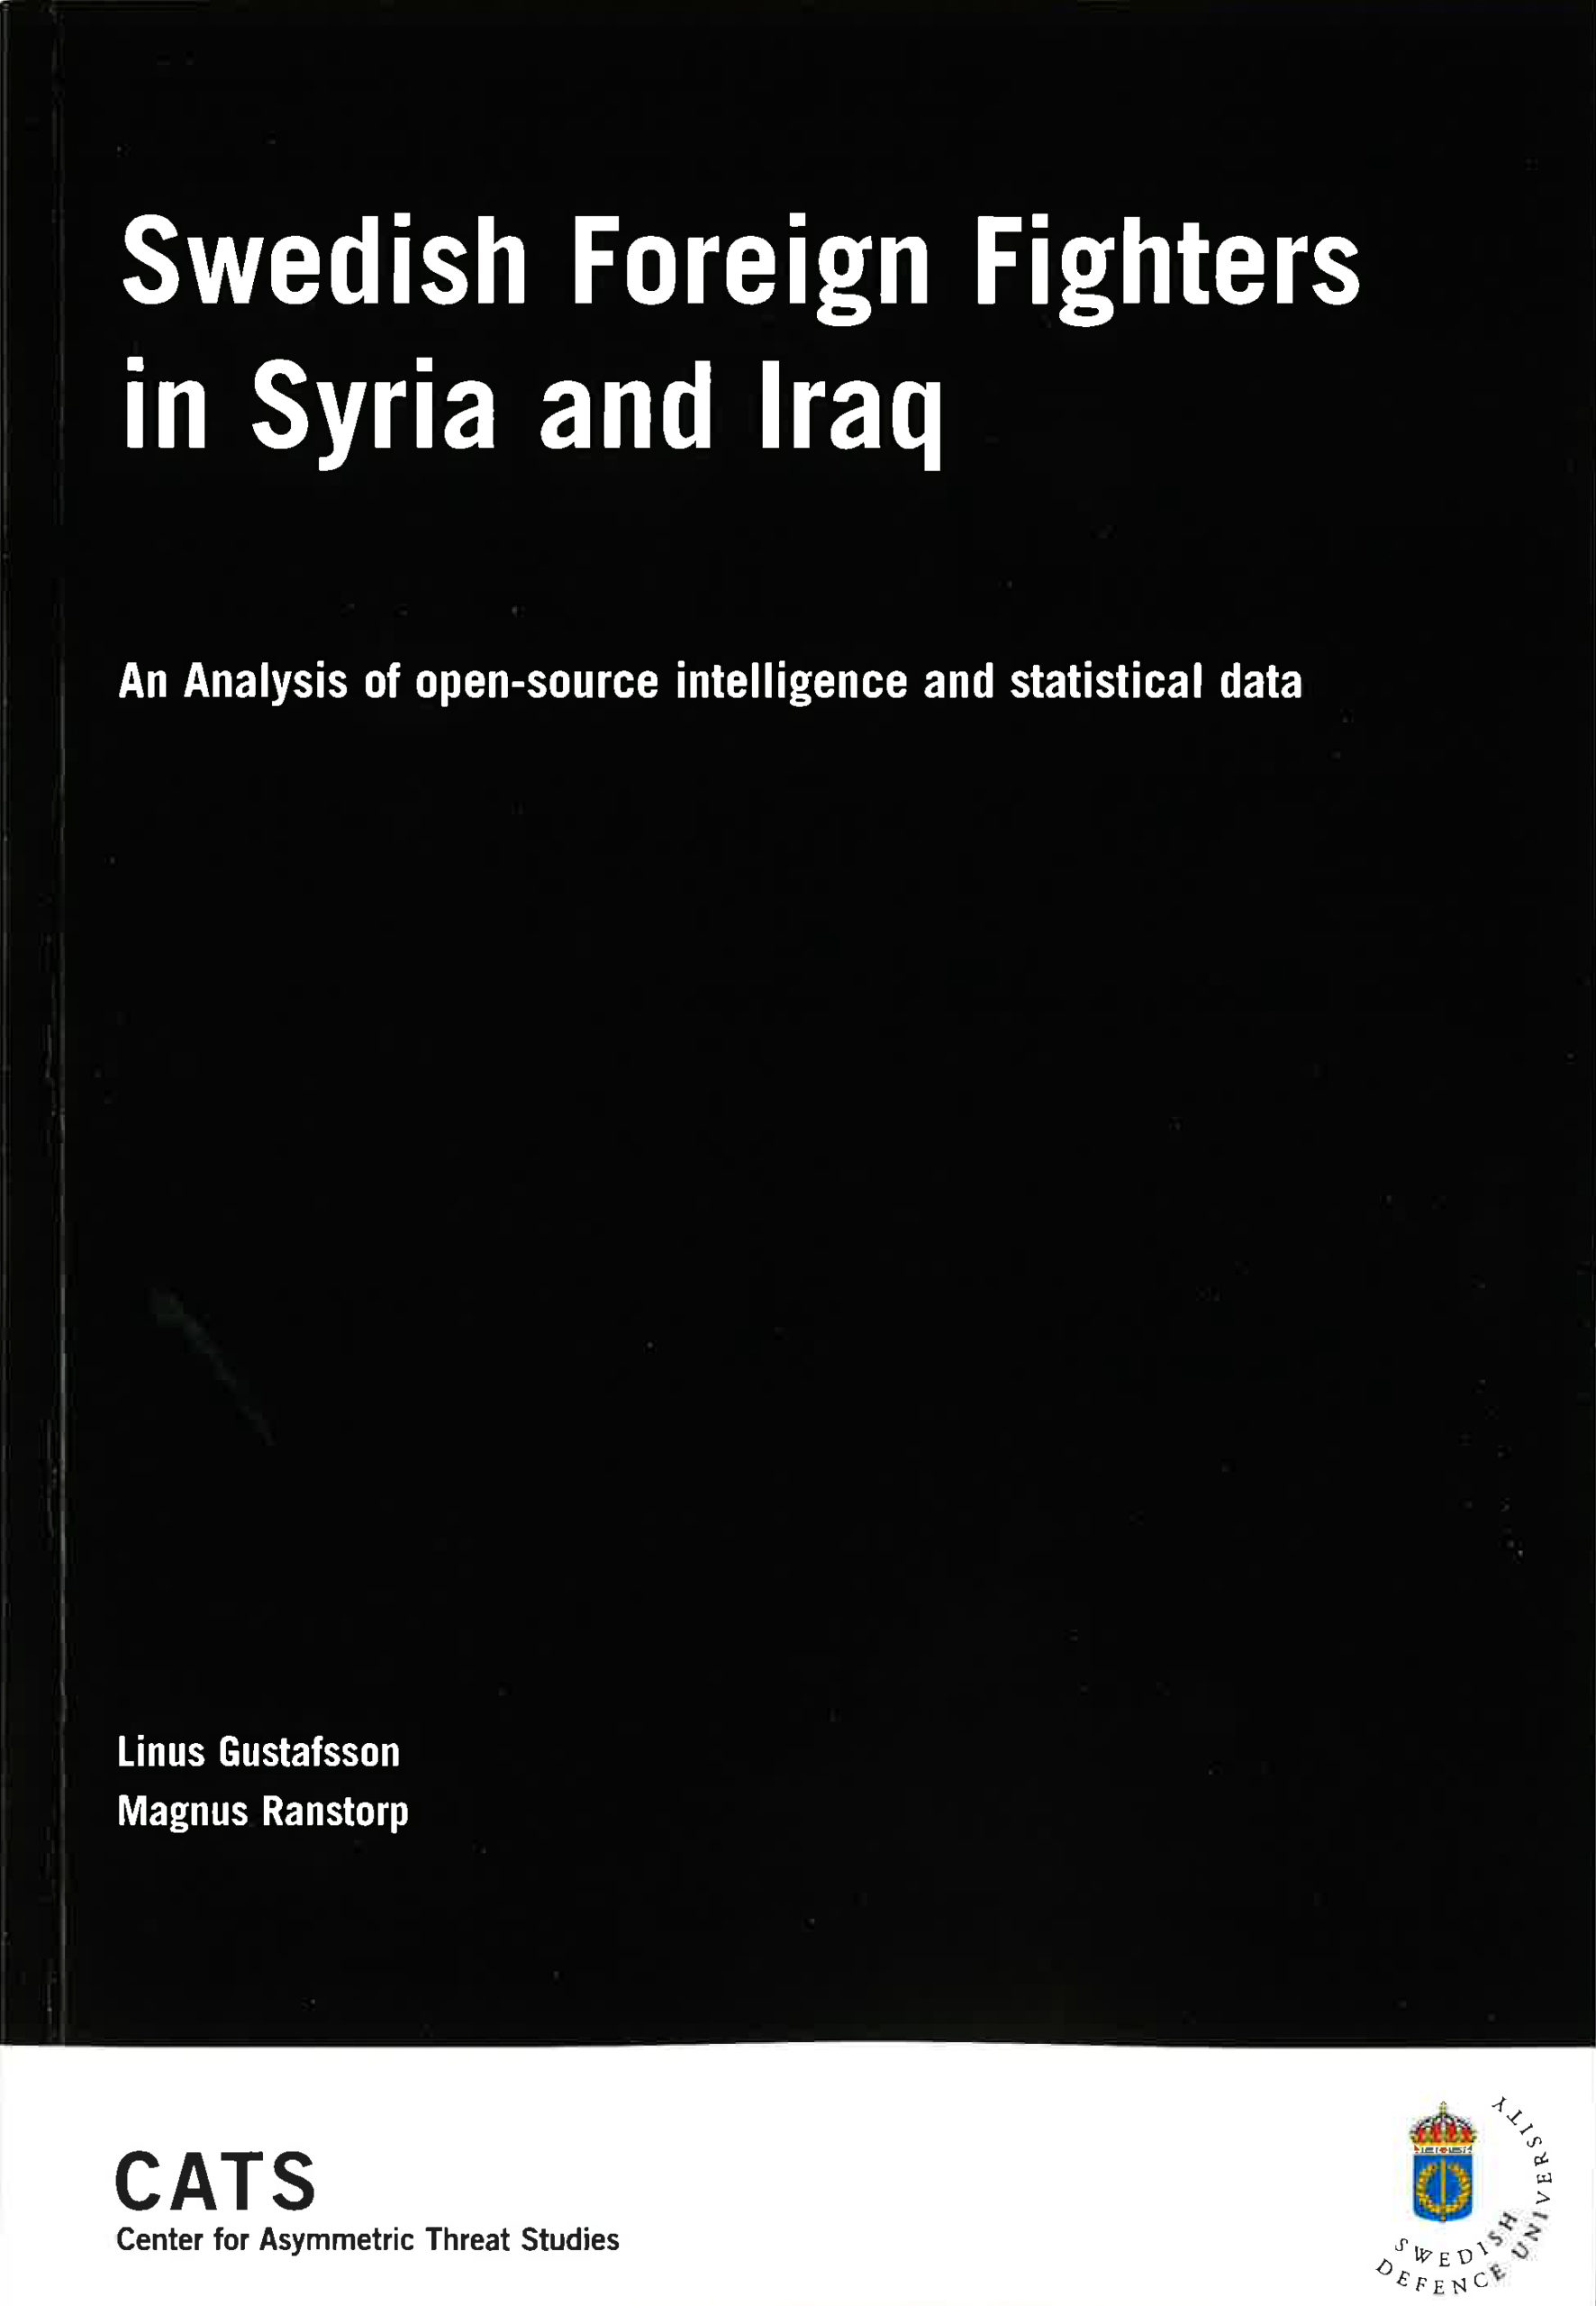 Swedish Foreign Fighters in Syria and Iraq: An analysis of open-source intelligence and statistical data